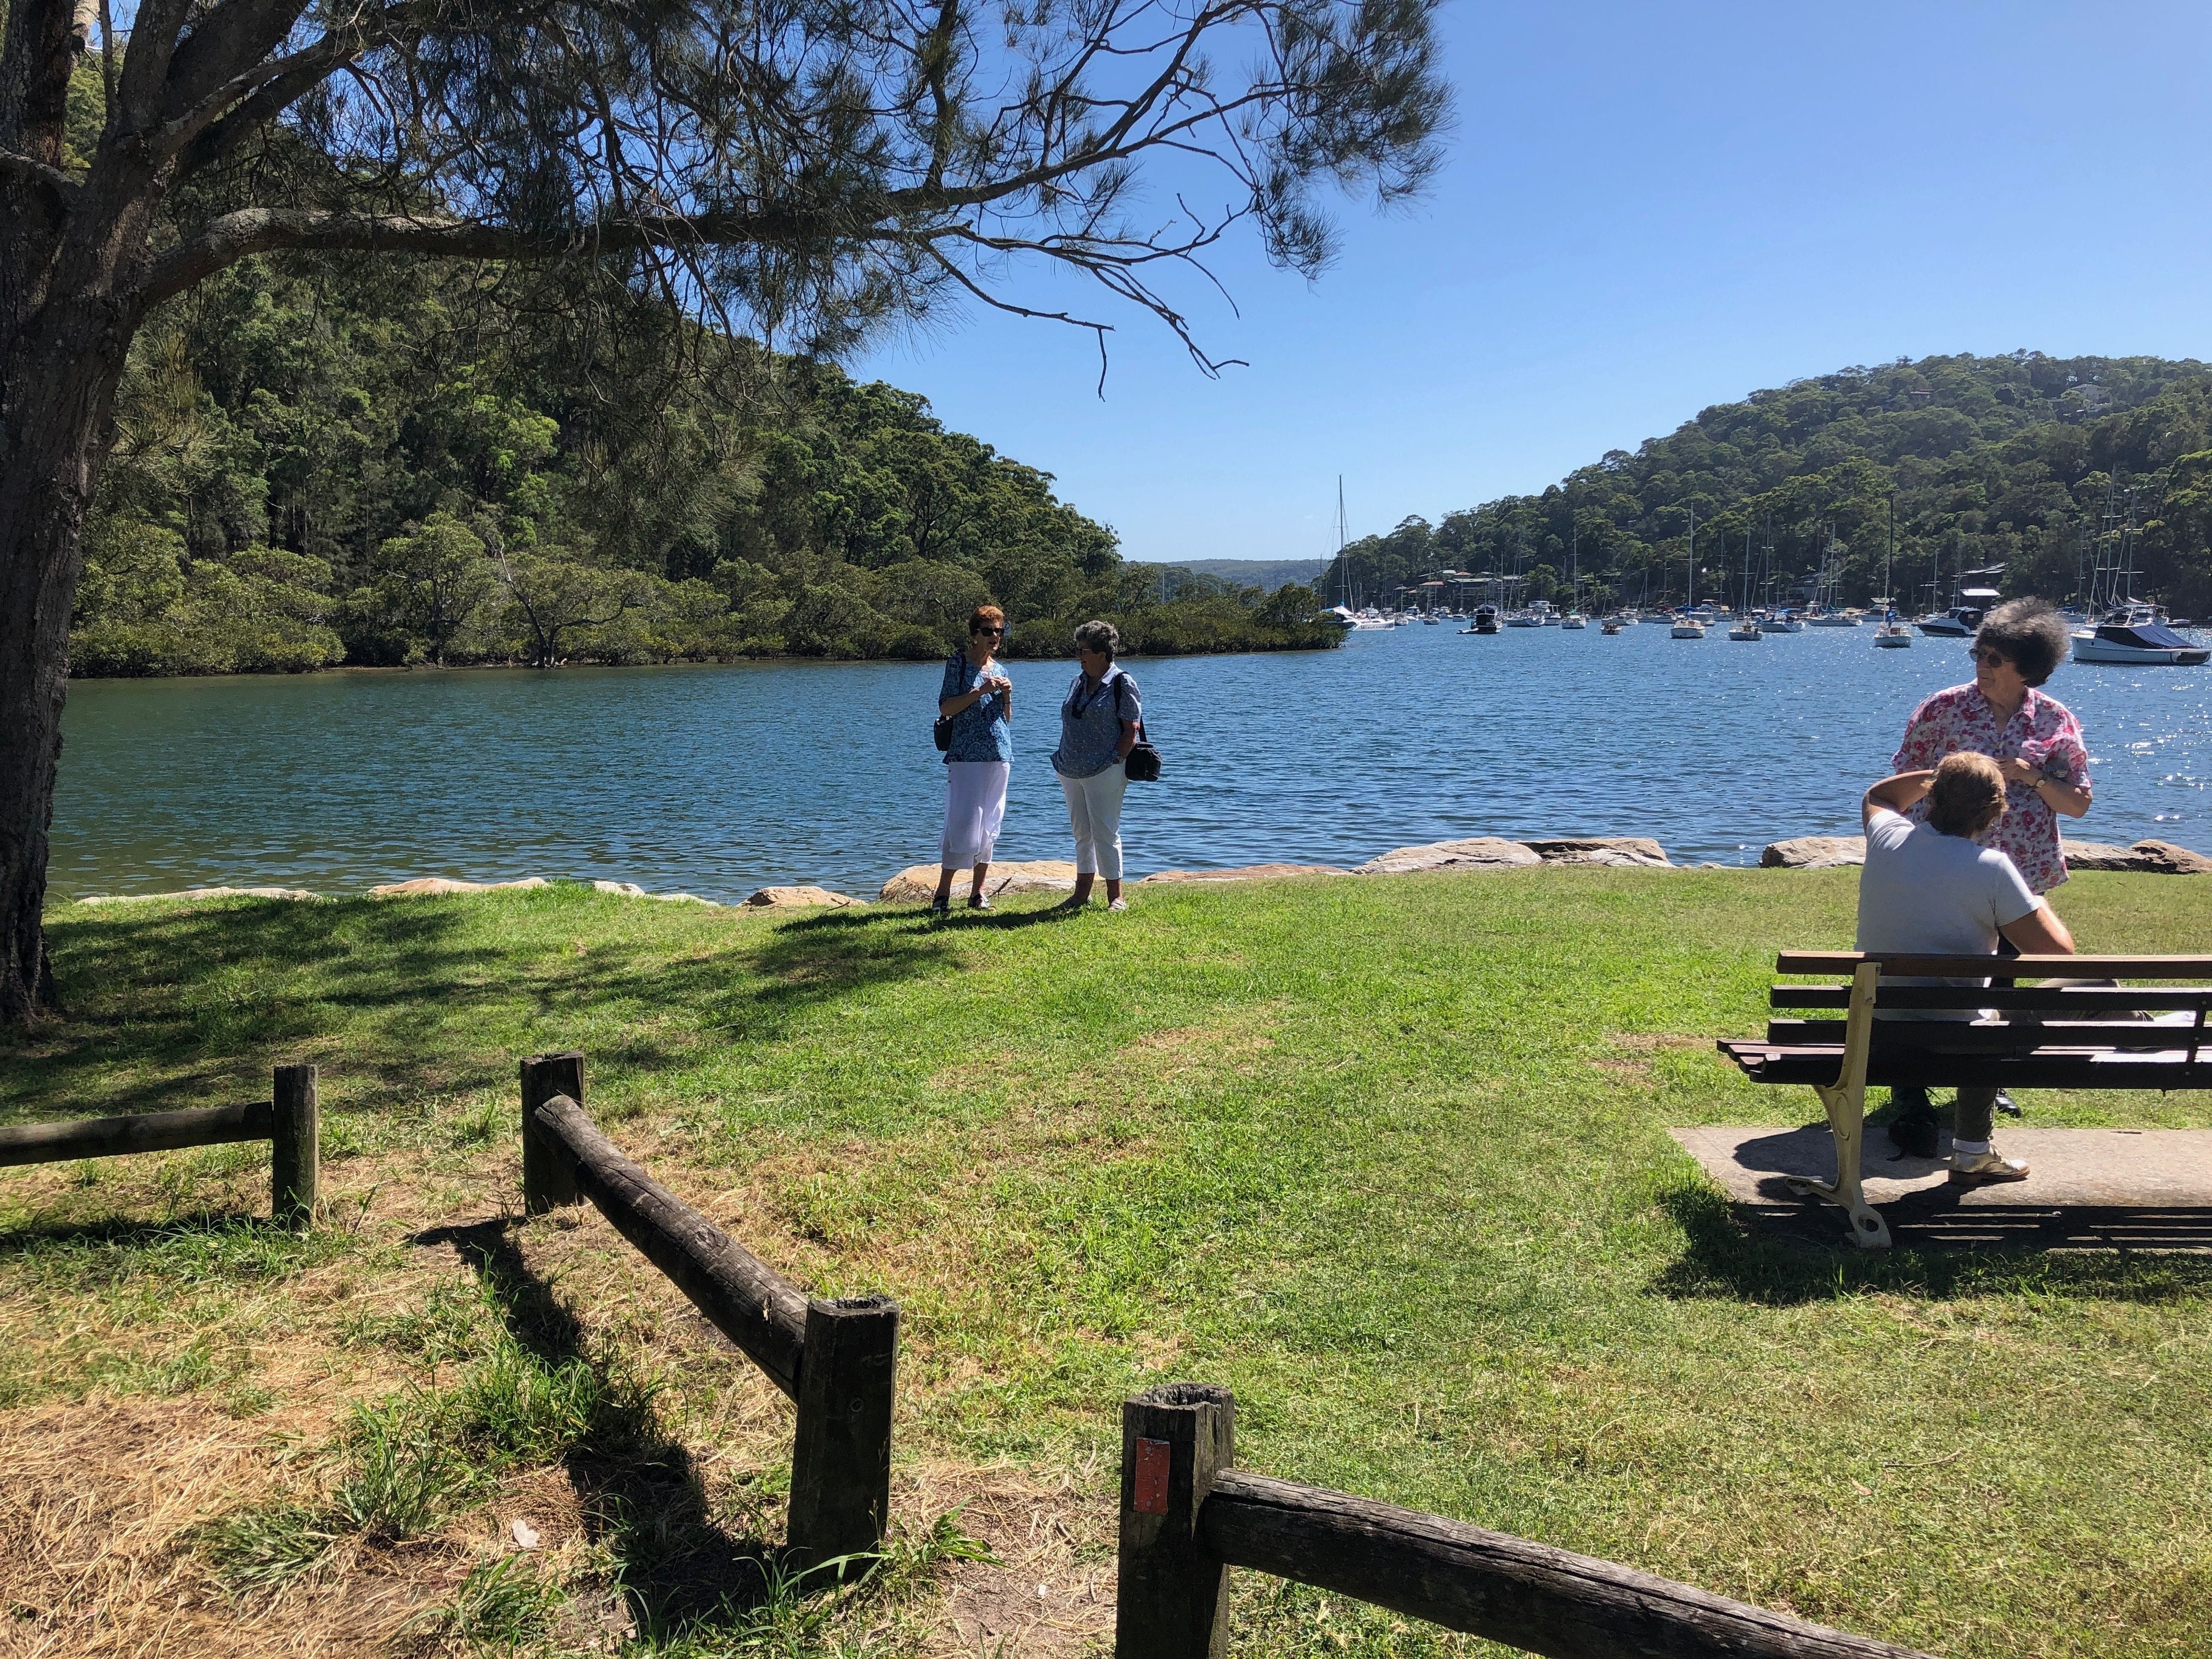 Northern Beaches Public Day Tour febuary 2019 Image -5c649607227c1